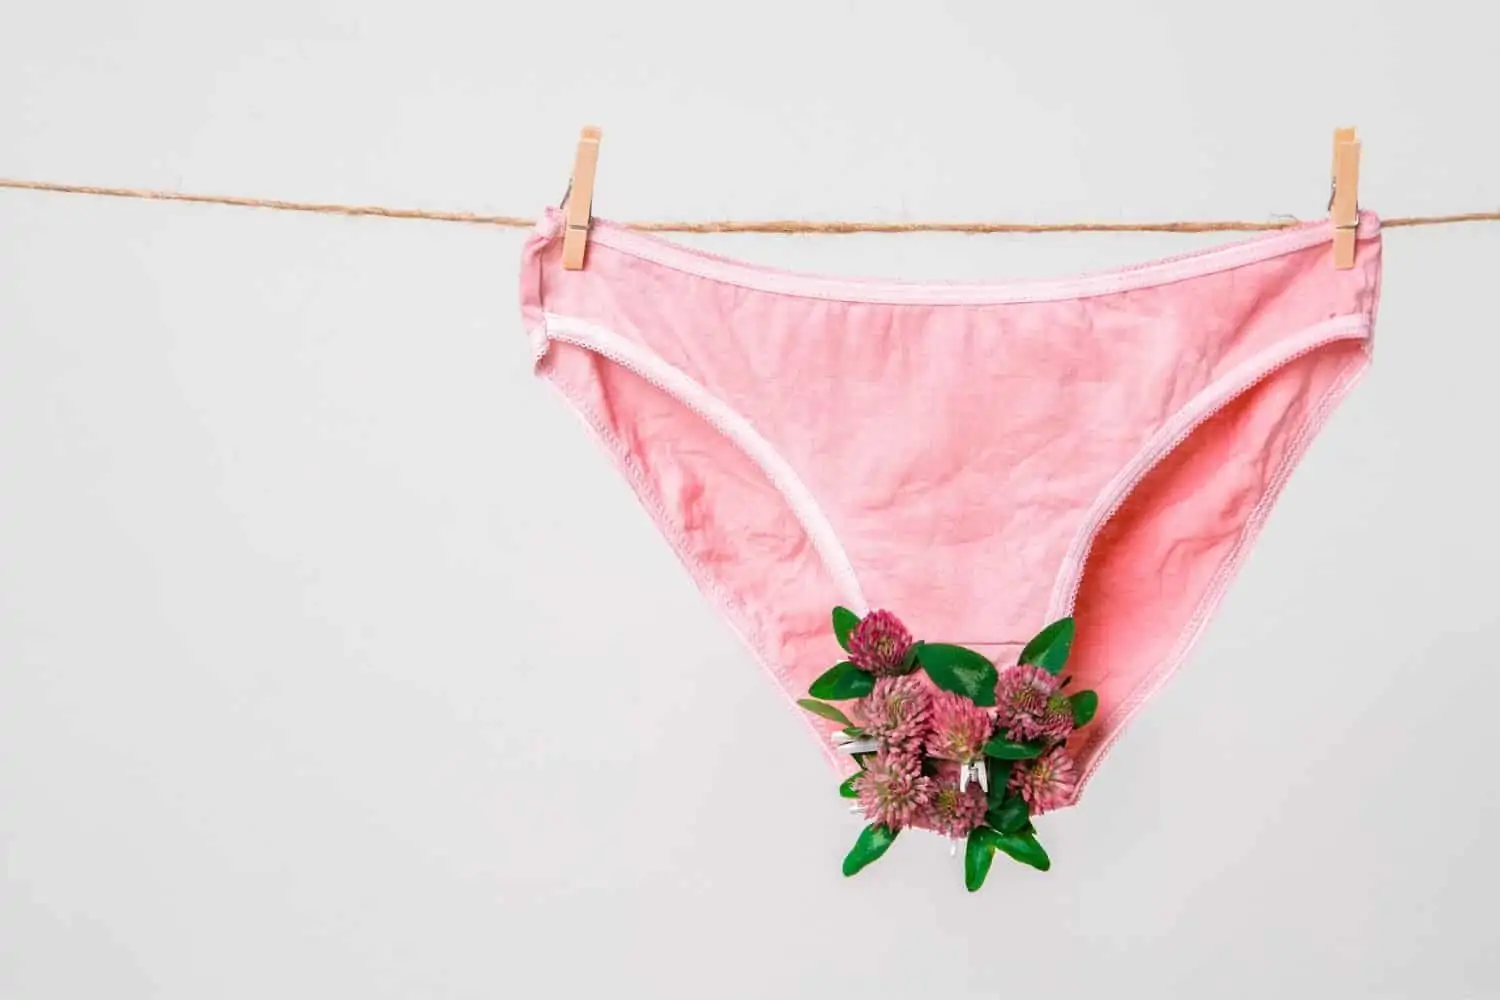 Bleached patches on panties